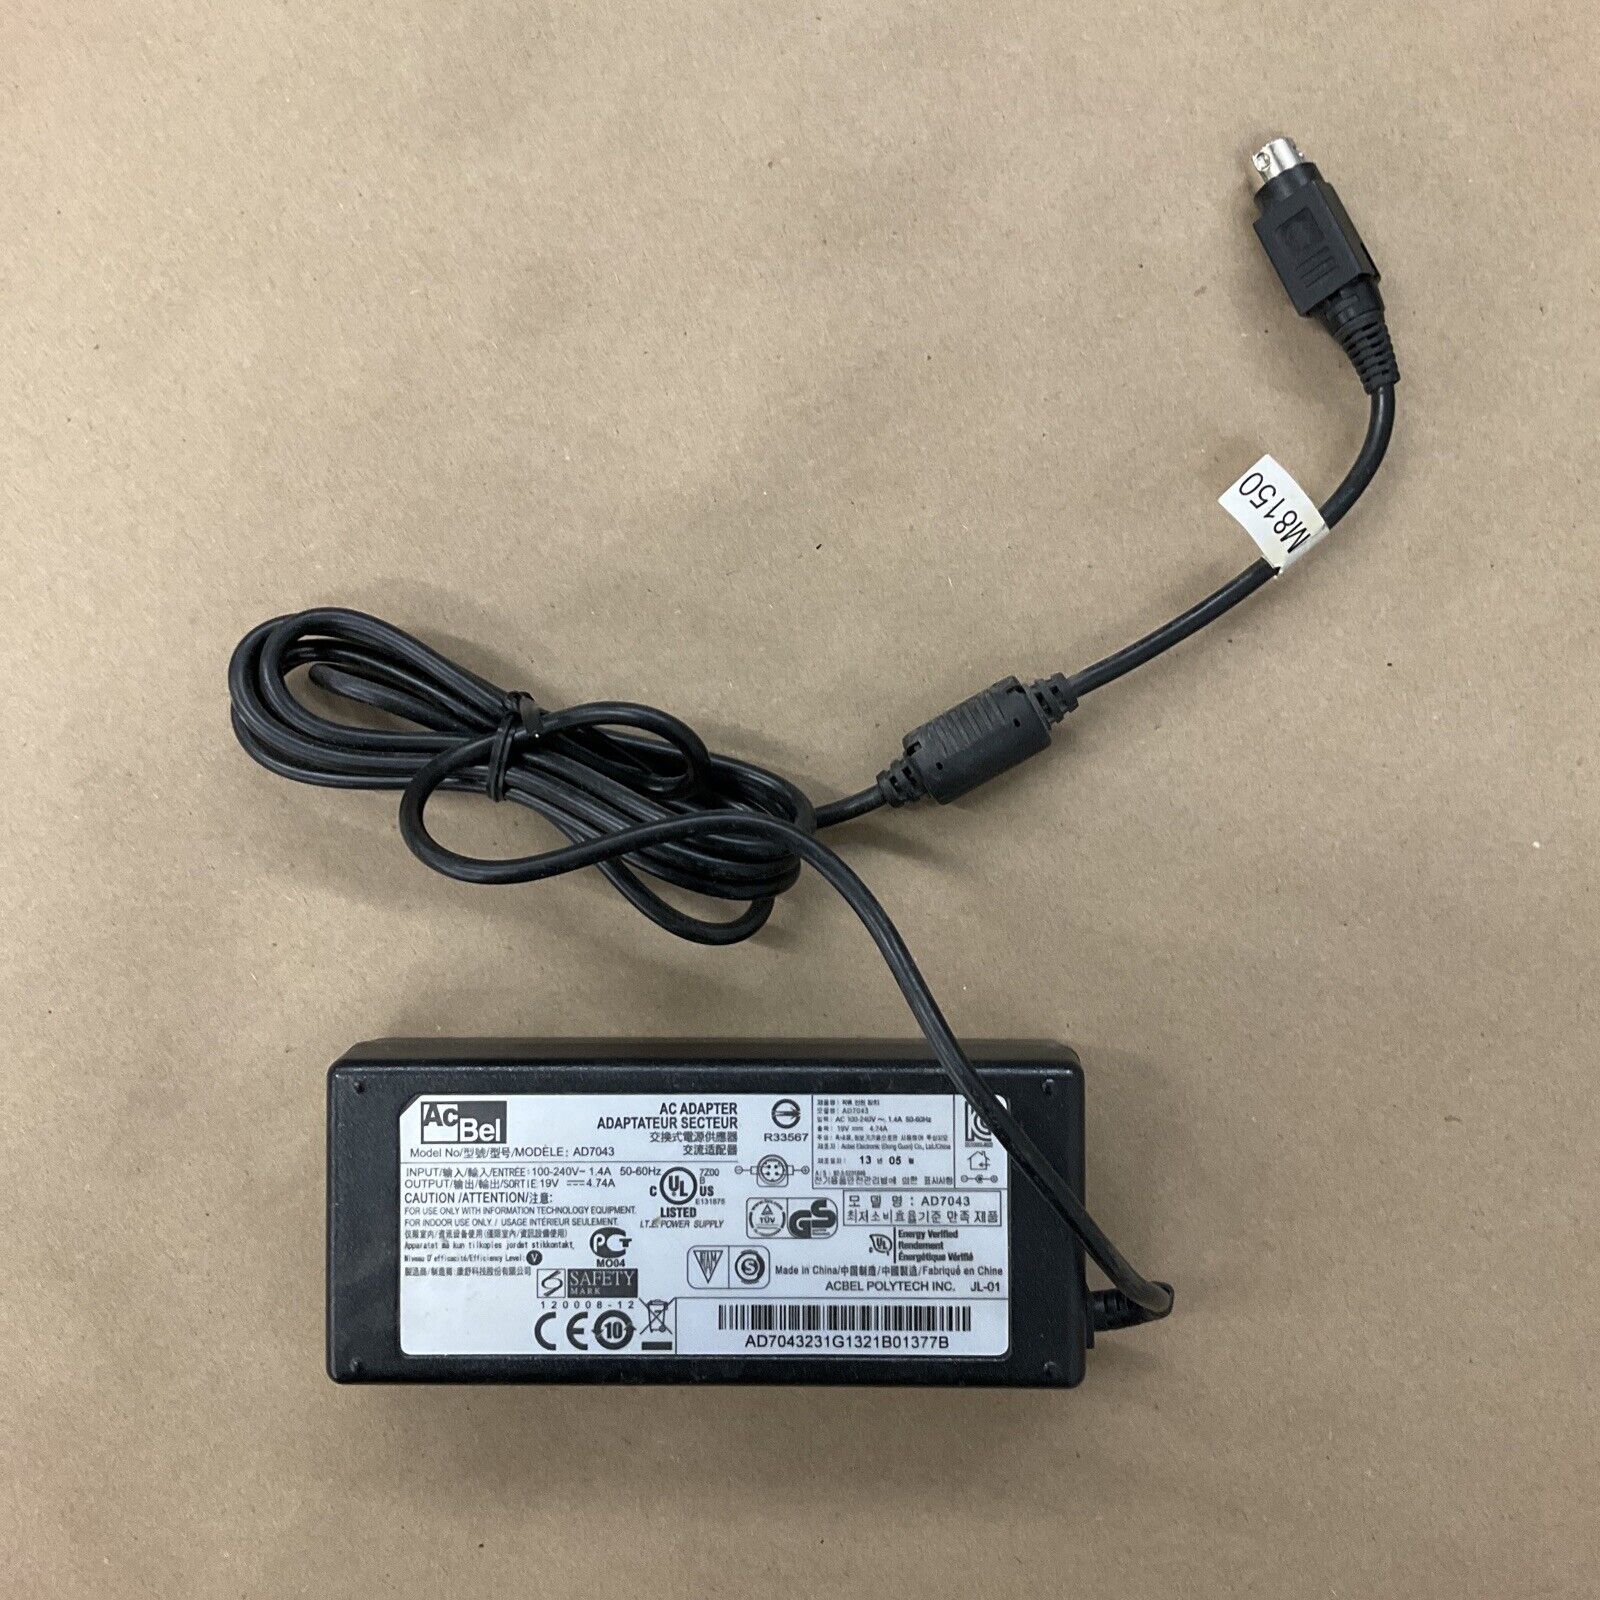 *Brand NEW*19v 4.74a AC/DC Adapter Charger Battery lead PSU for AcBel AD7043 I.T.E. Power Supply Cord